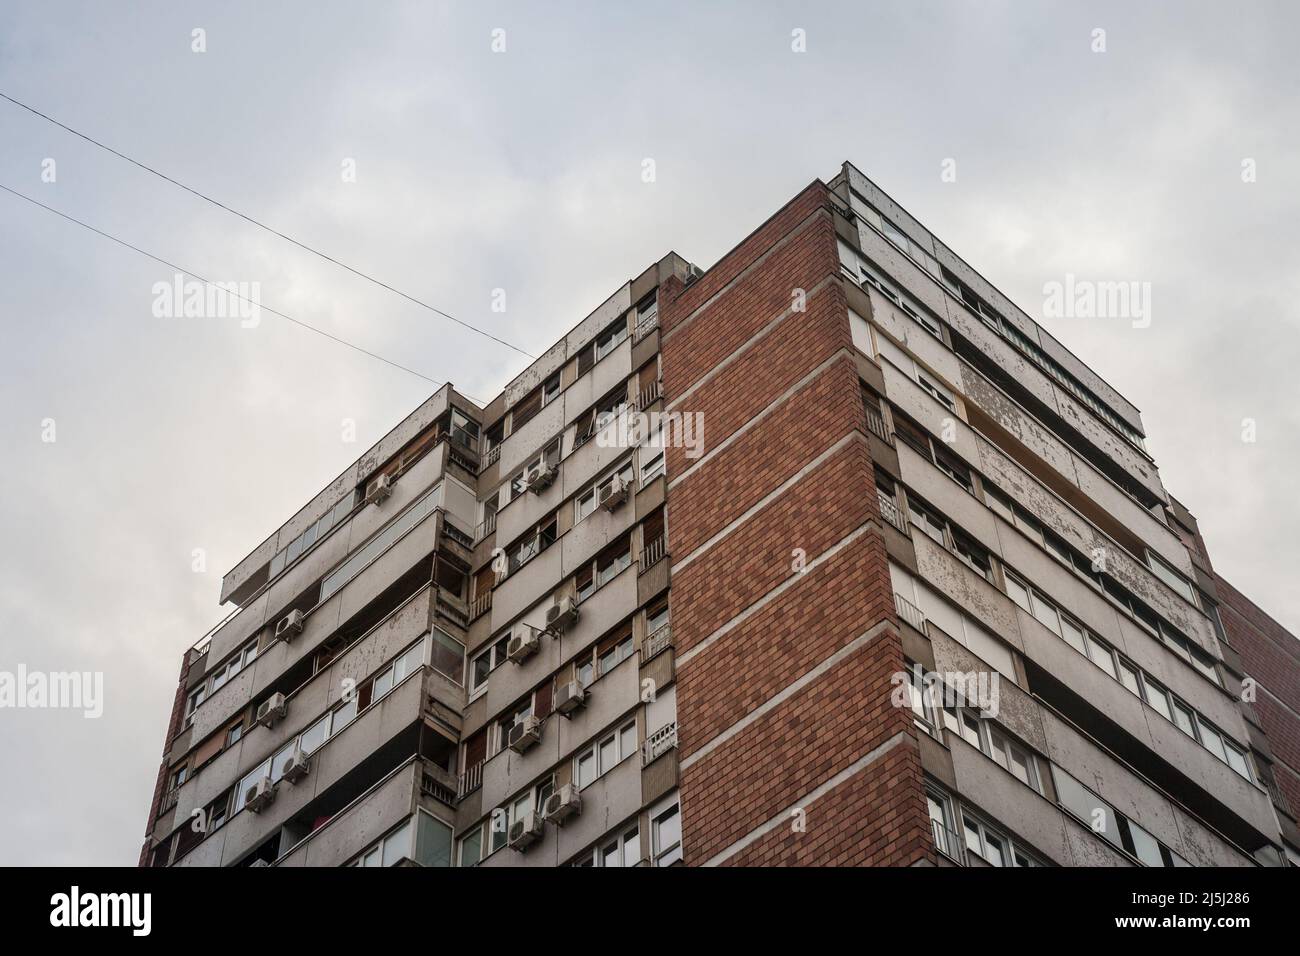 Picture of Eastern European towers in Belgrade, Serbia, in poor condition with concrete falling down and old AC units. These buildings are a symbol of Stock Photo